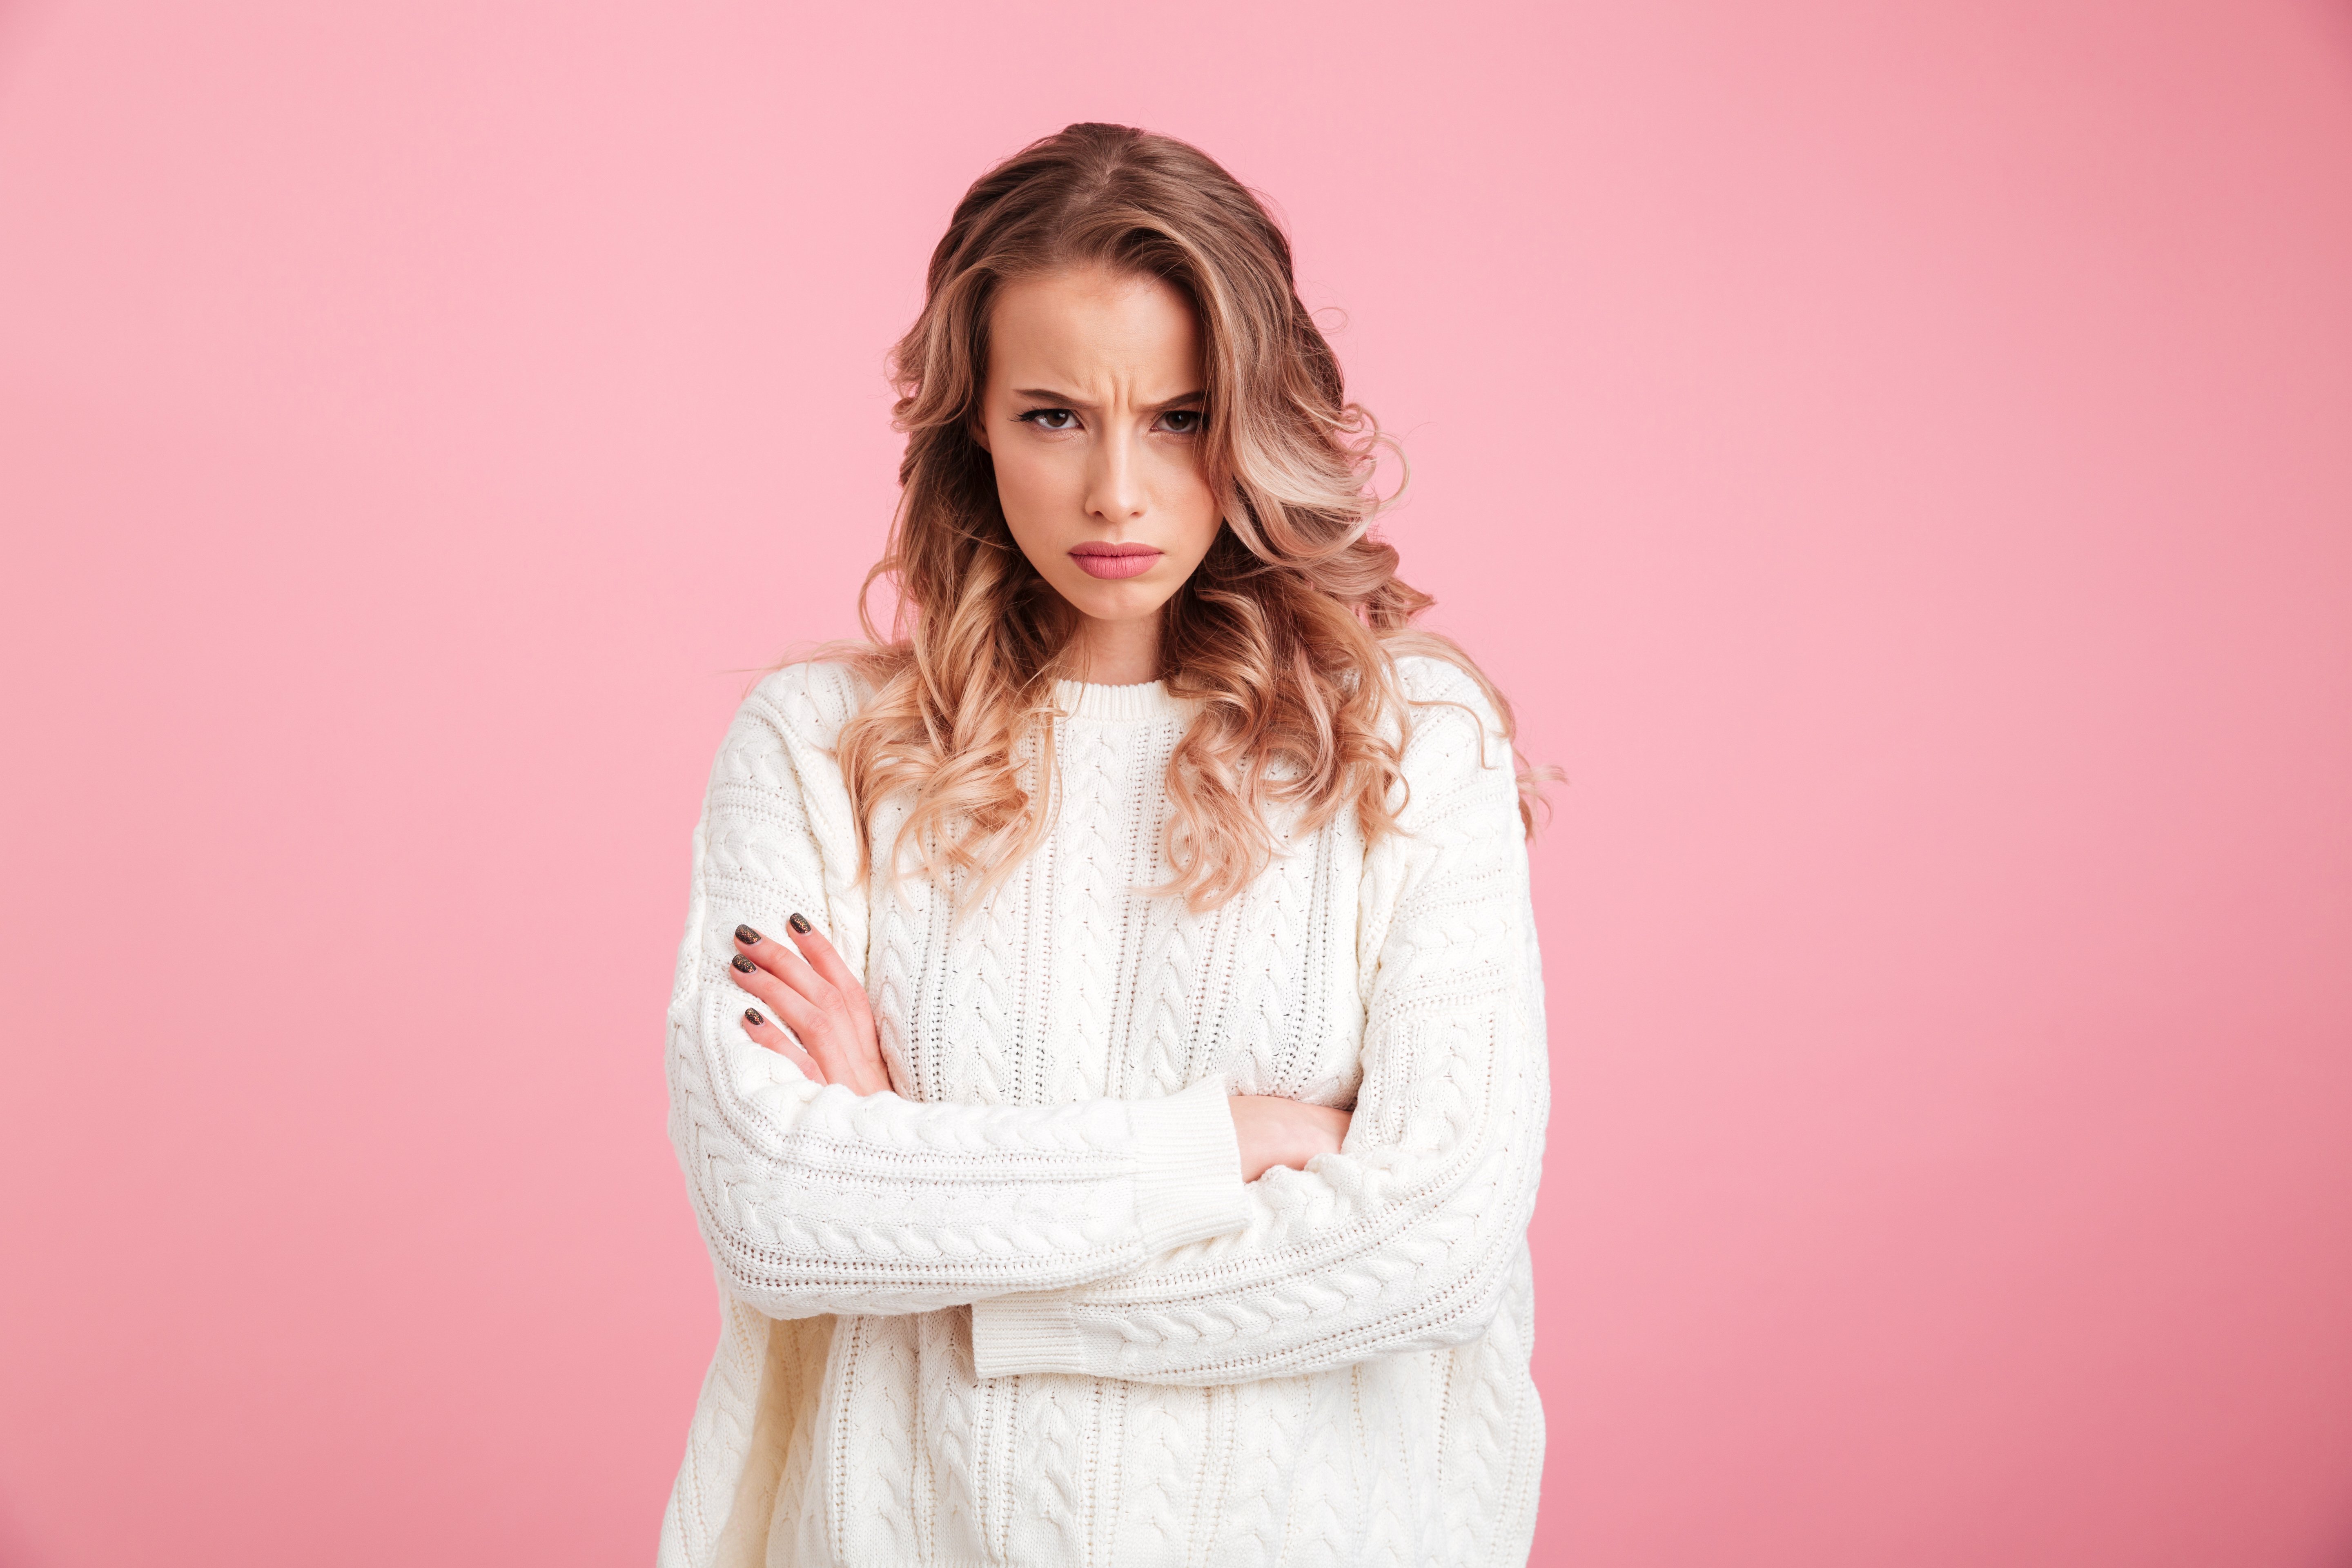 Angry young woman with arms folded. | Photo: Shutterstock